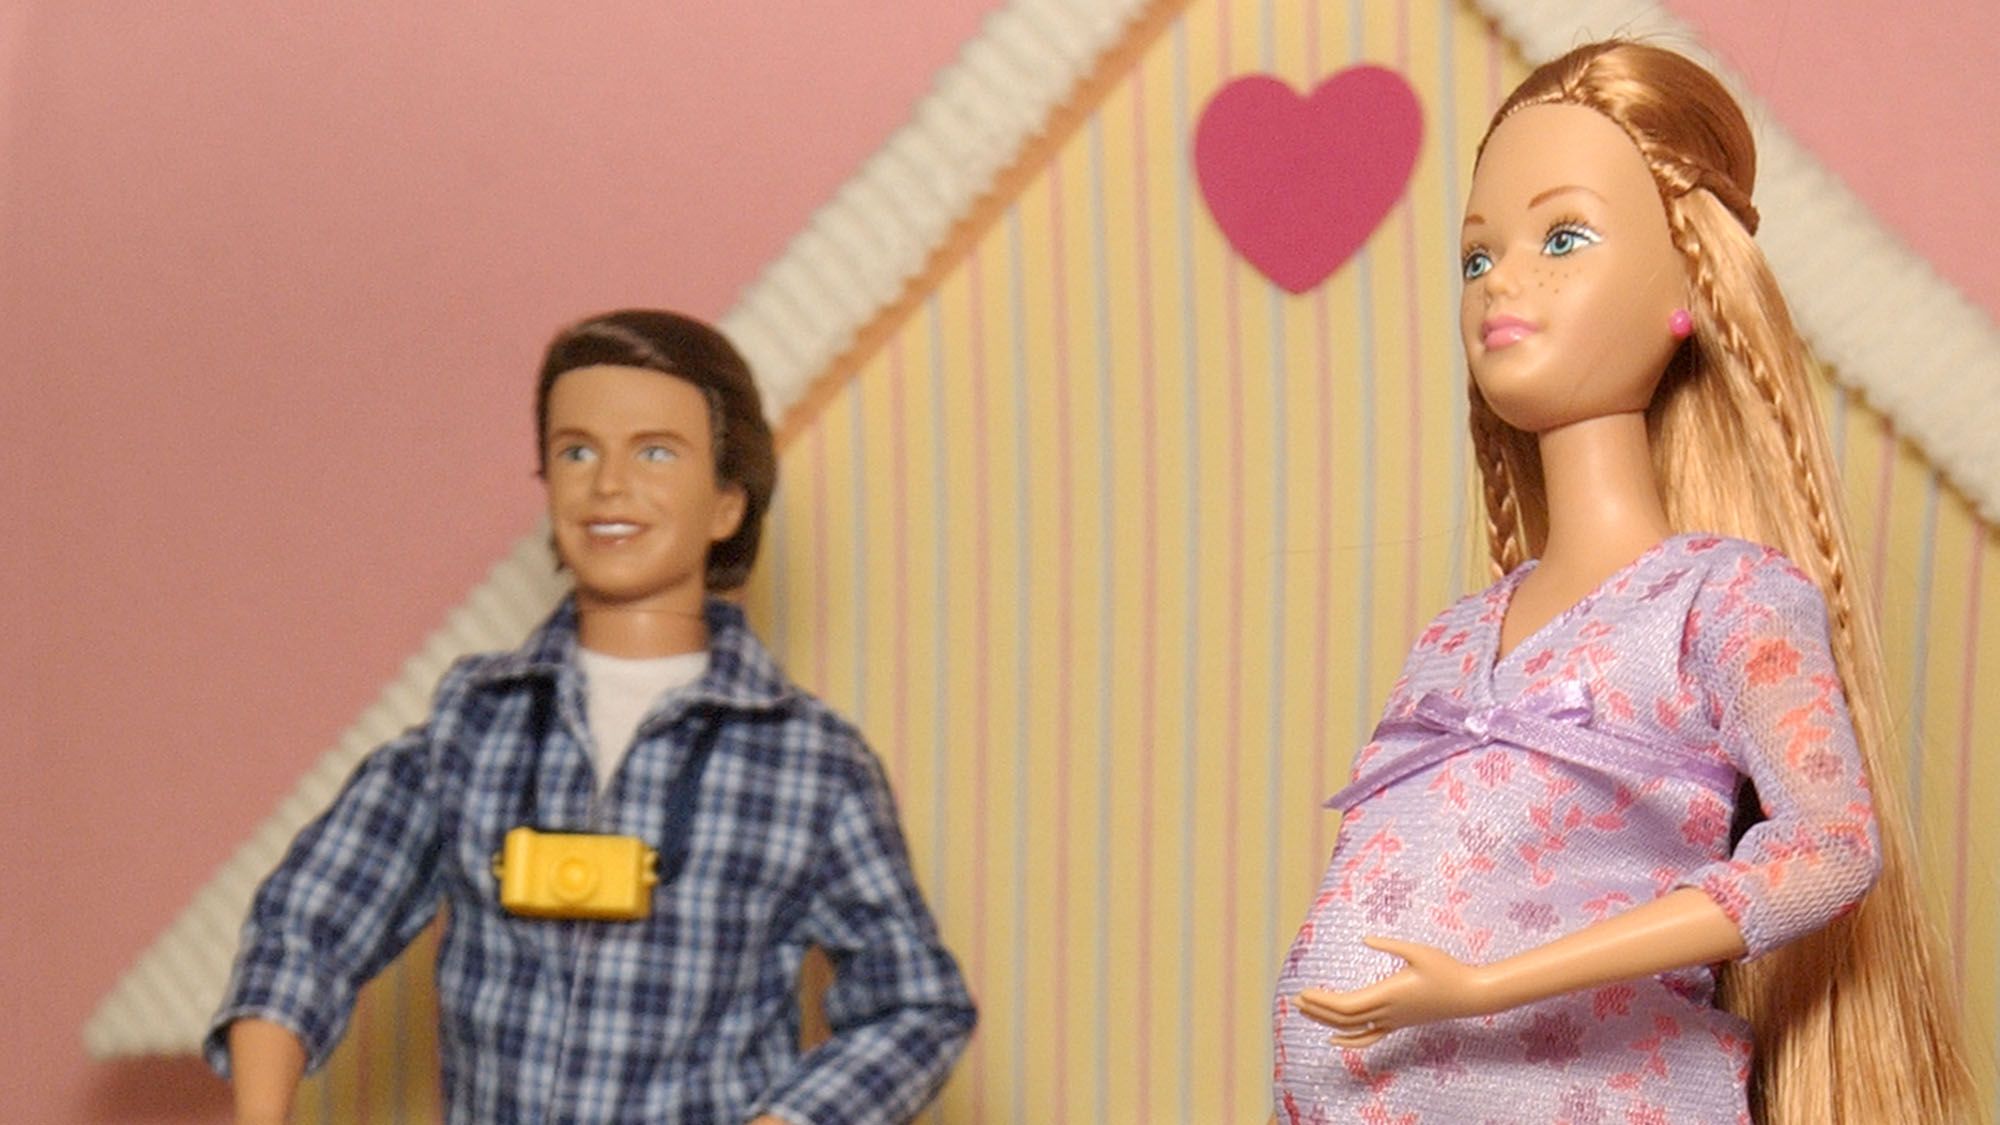 All About Midge: The Pregnant Barbie And Her Husband Allan